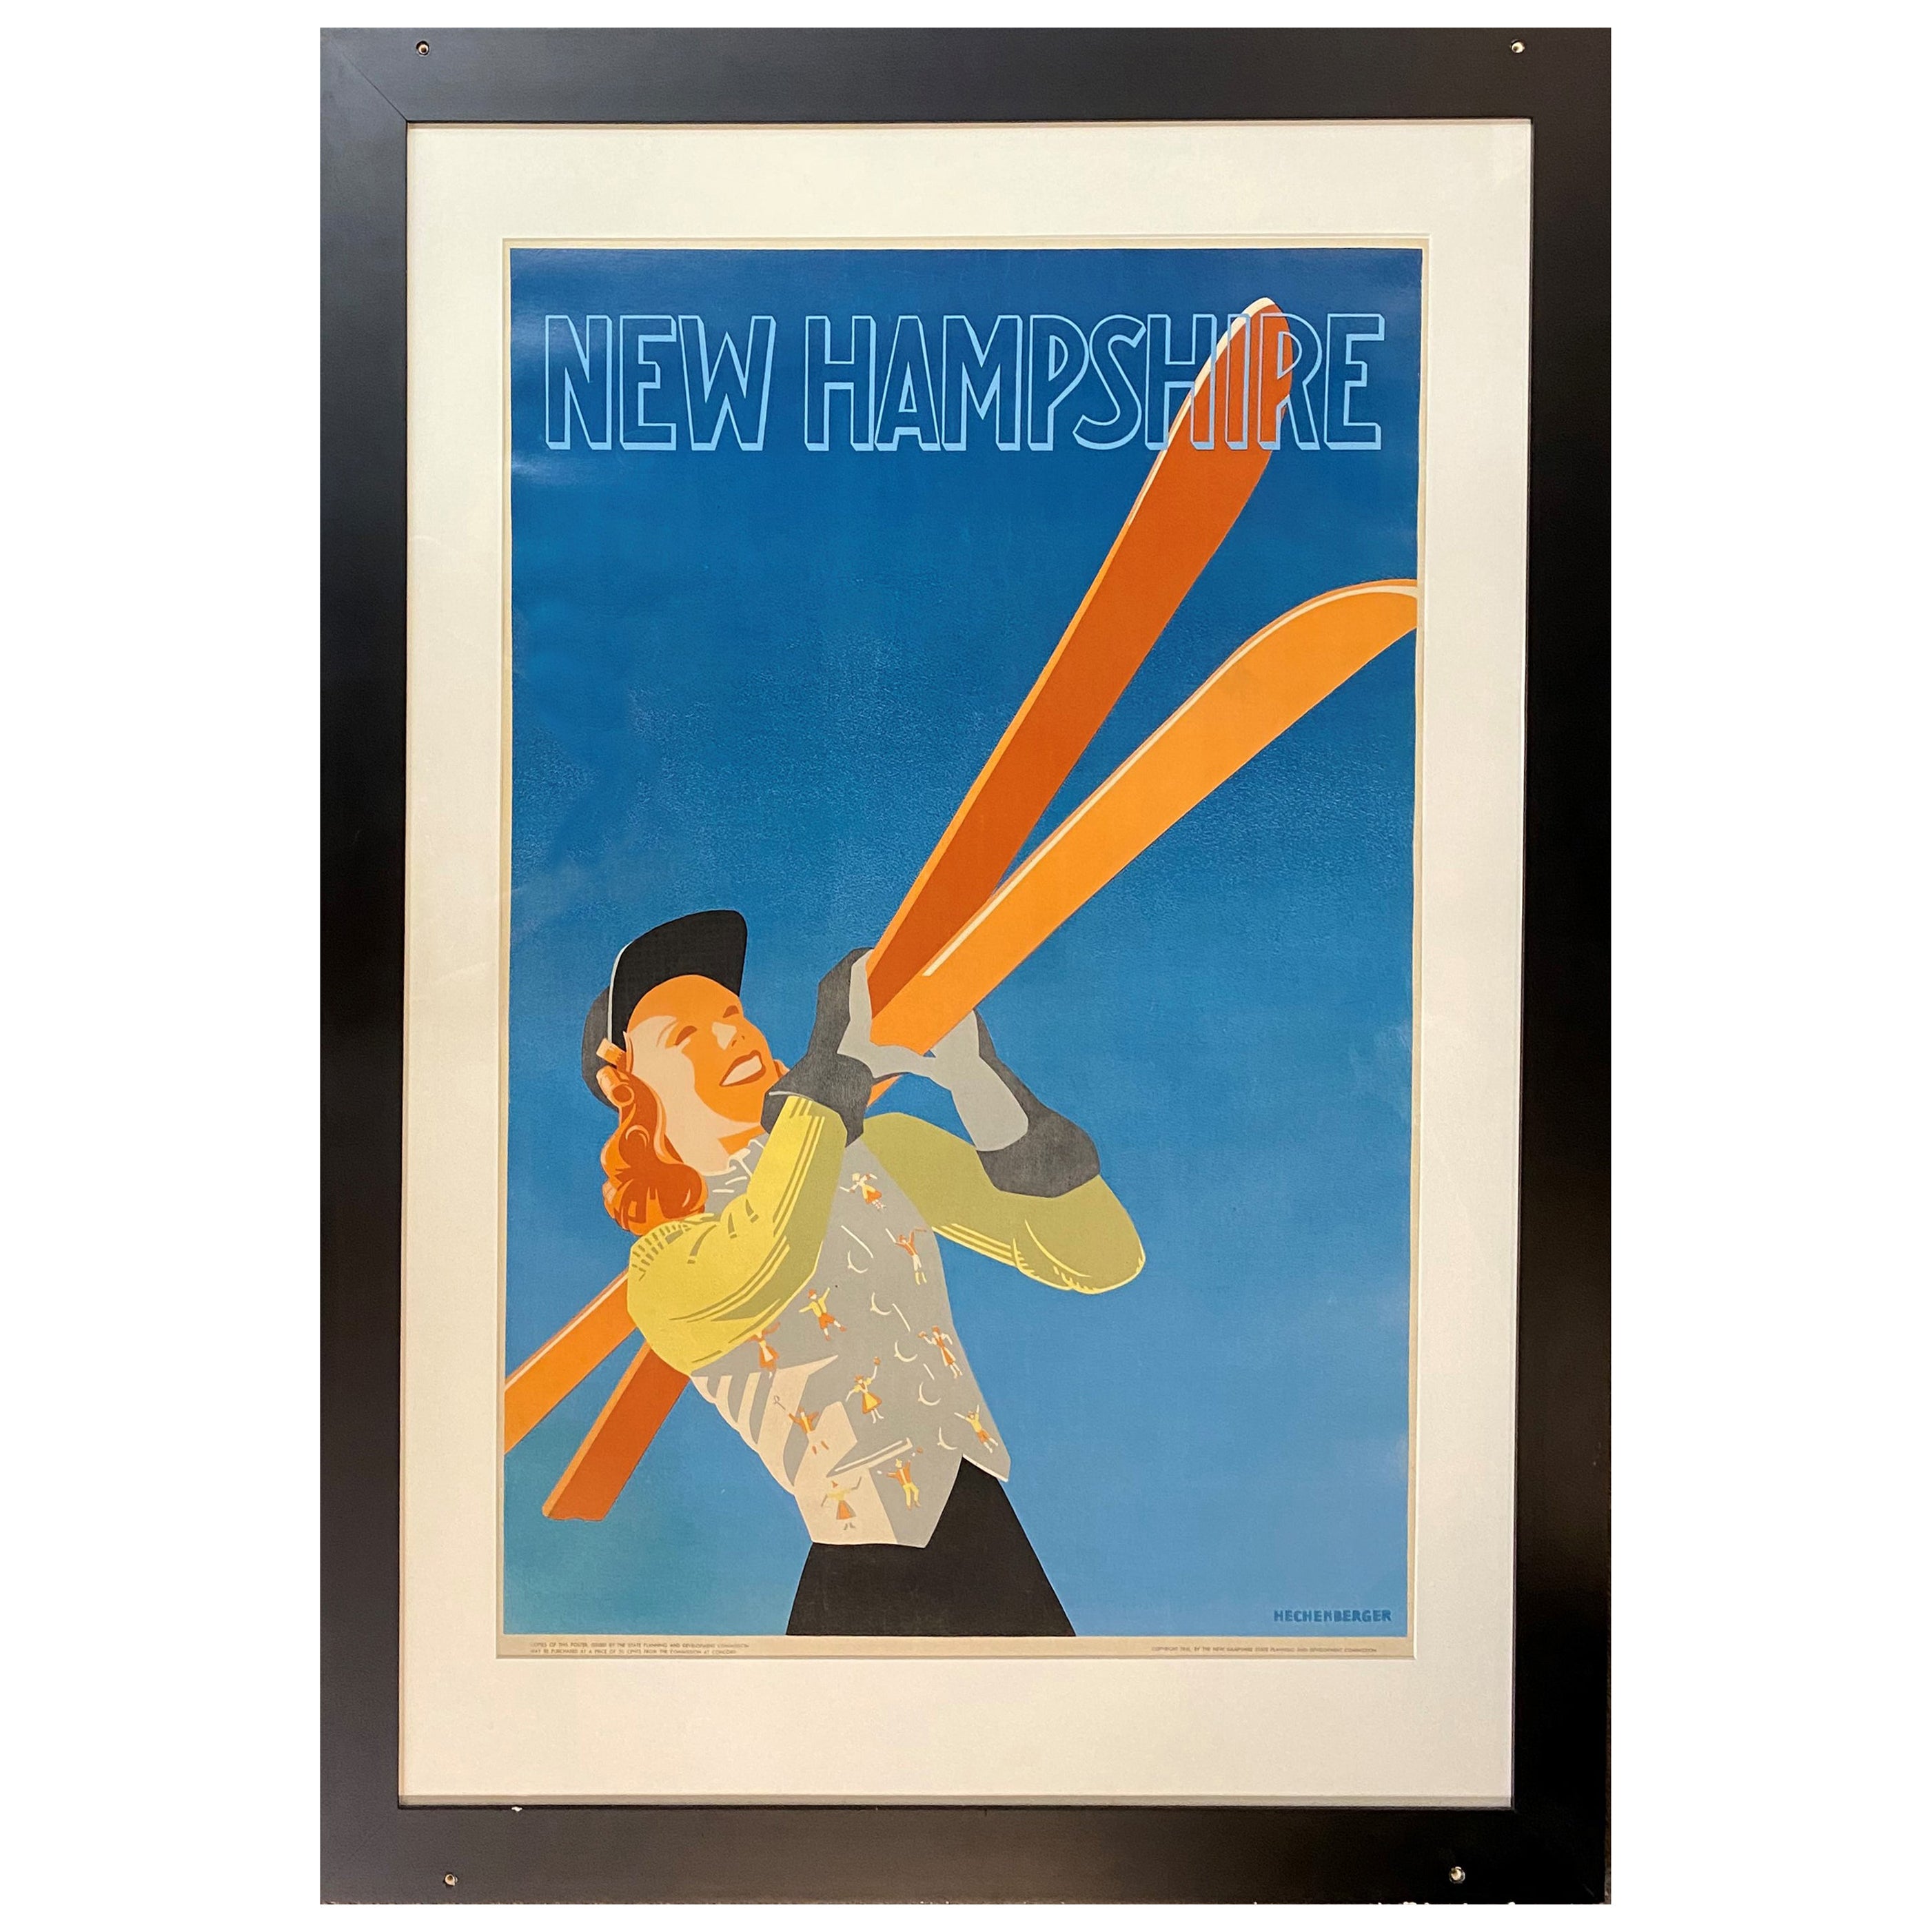 1941 Vintage New Hampshire Art Deco Style Ski Promotion Poster by Hechenberger